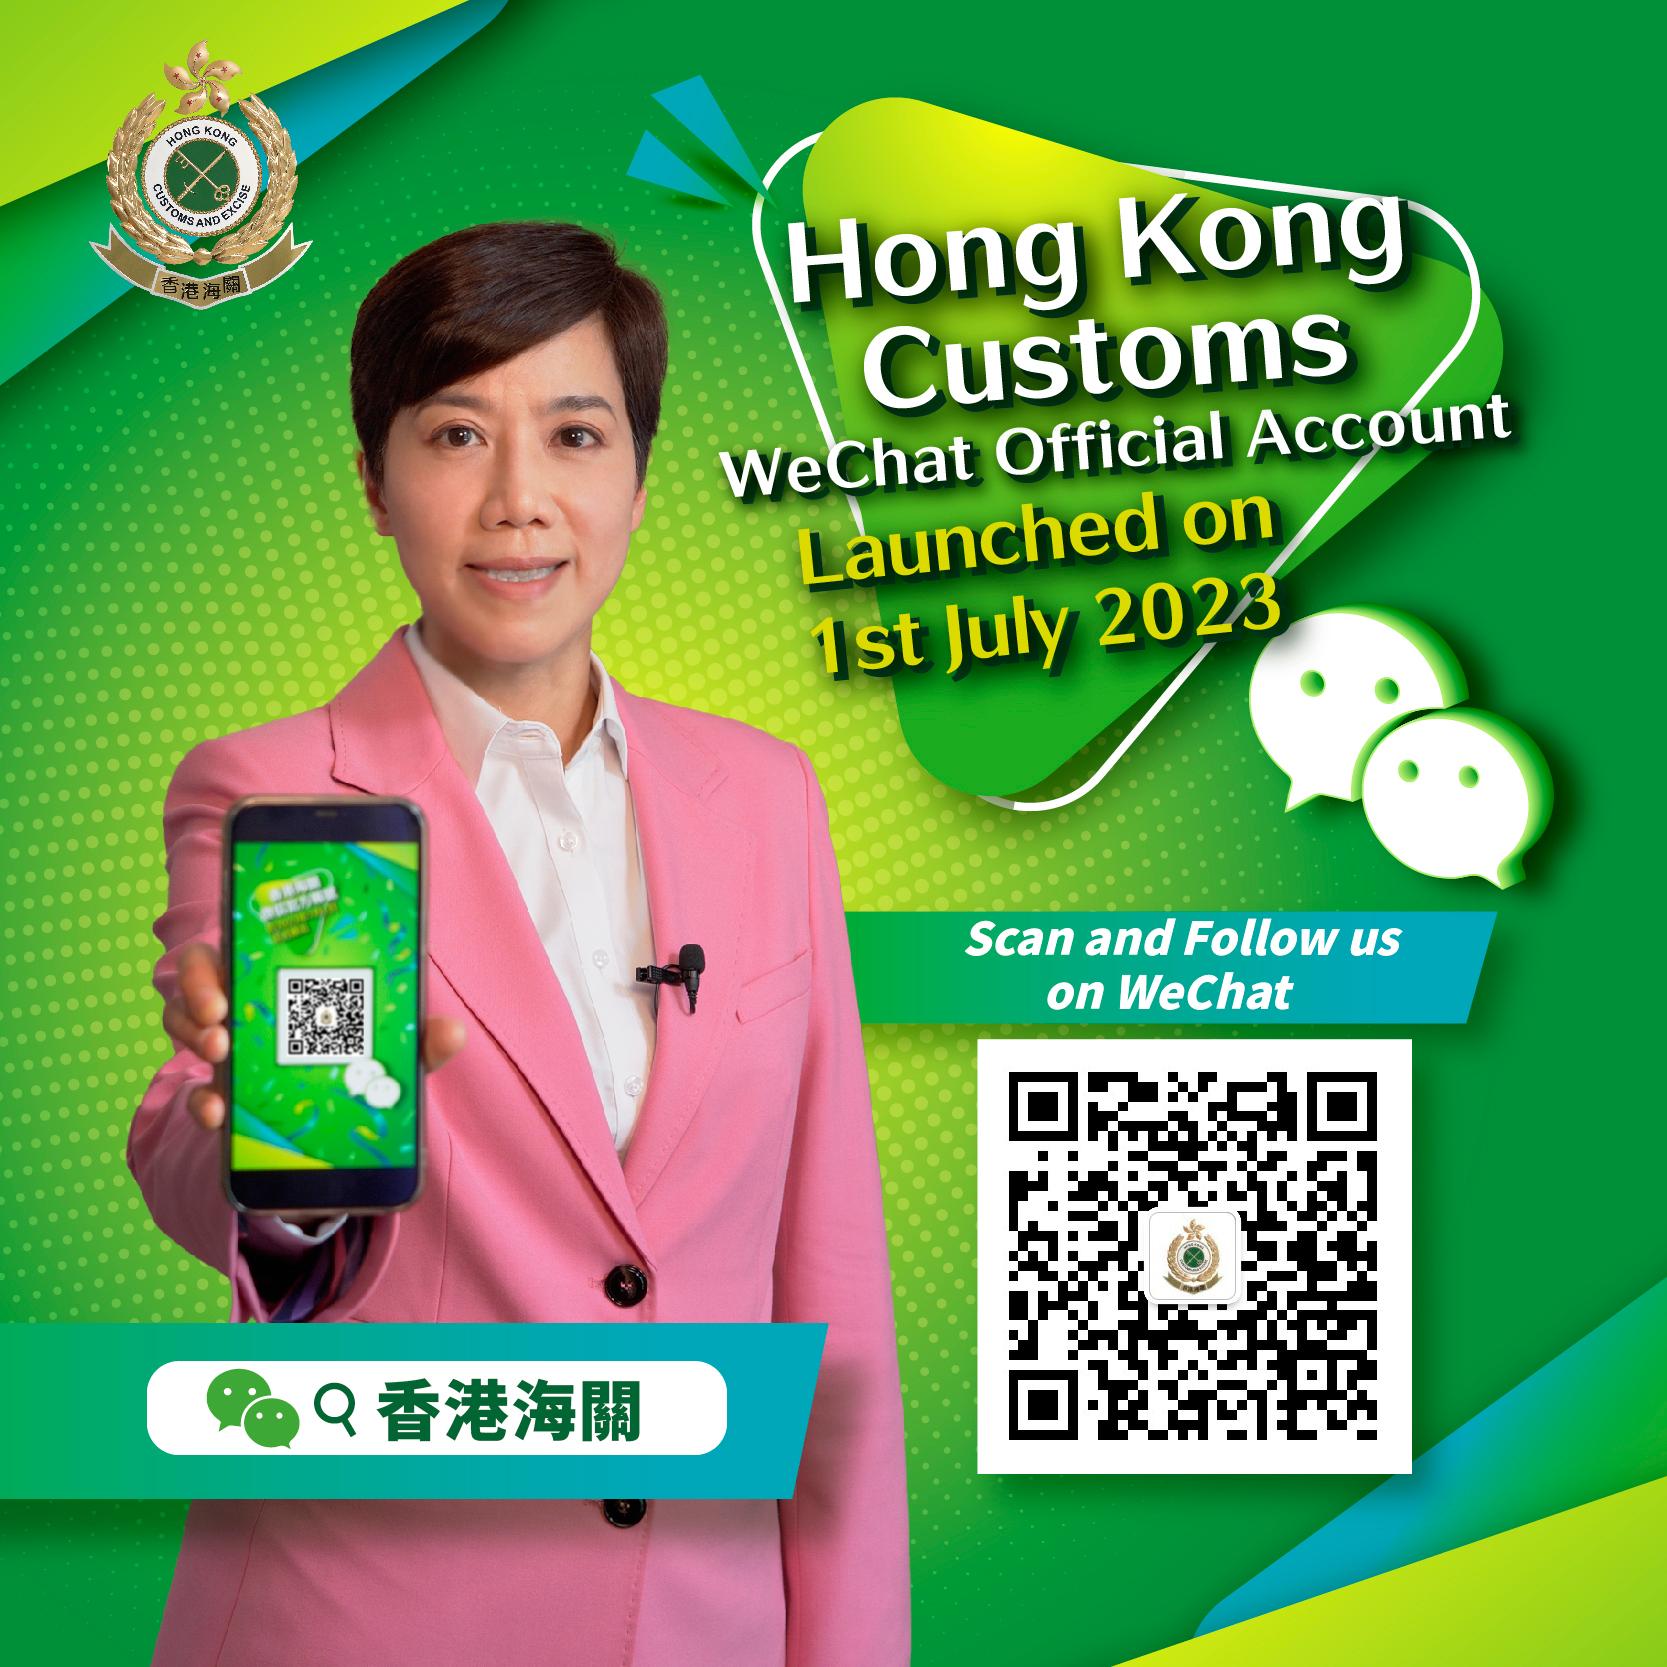 Hong Kong Customs launched its WeChat official account today (July 1). A promotional video featuring the Commissioner of Customs and Excise, Ms Louise Ho, has been produced specifically as a prelude to the launch. Photo shows a screenshot of the video.